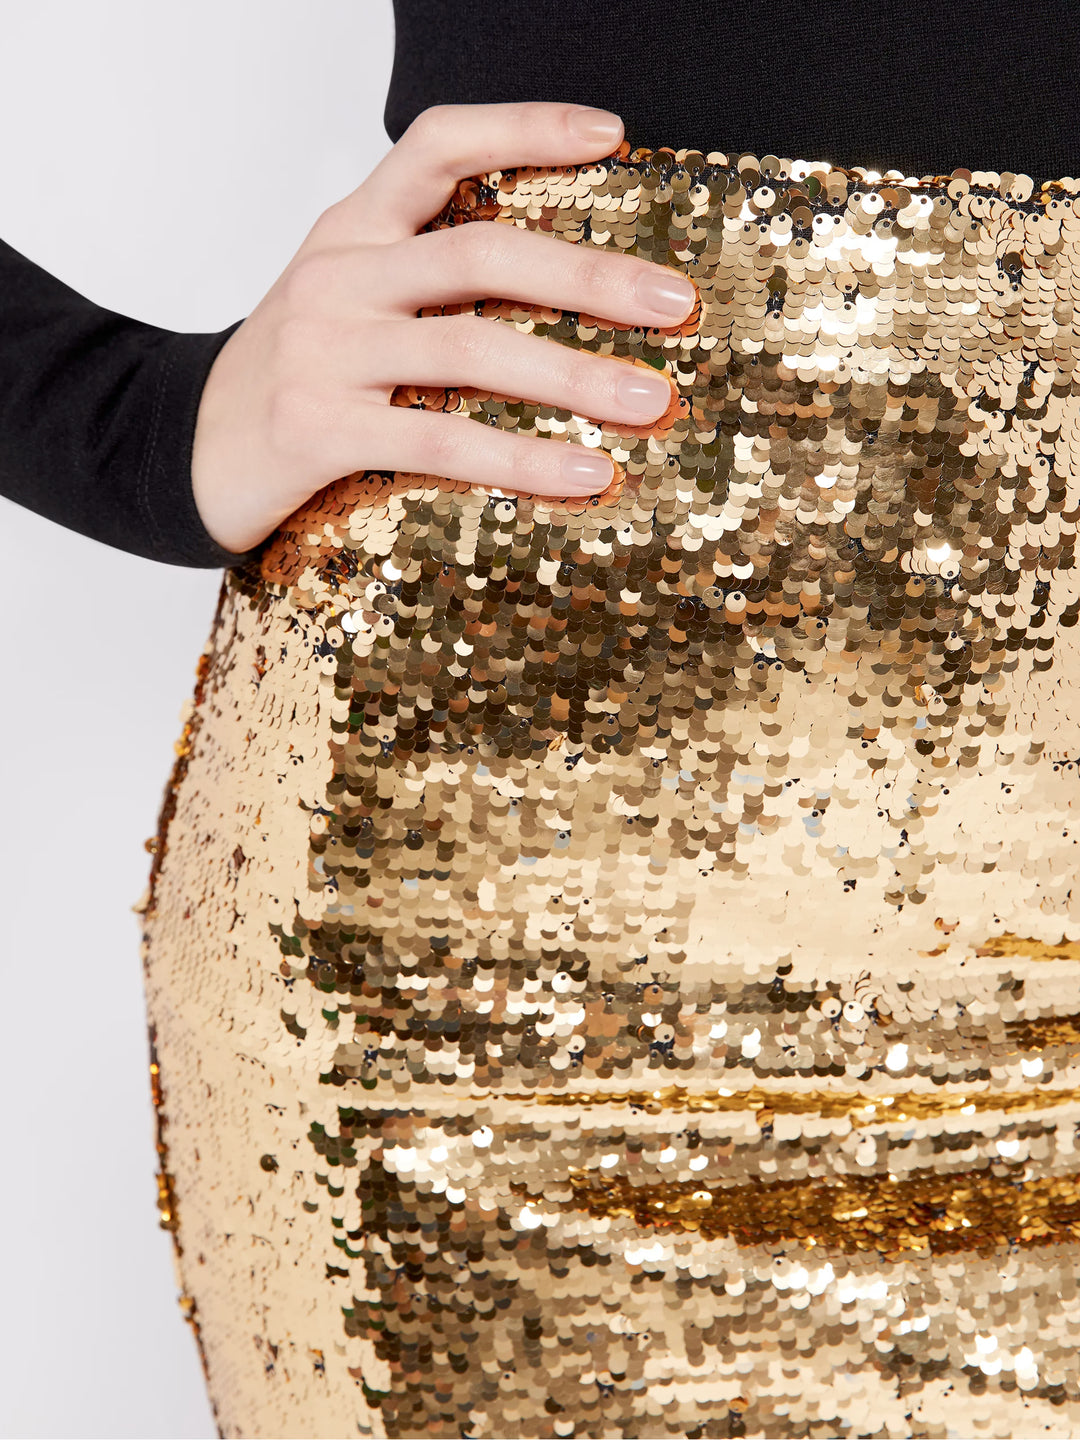 Alice + Olivia - Ramos Embellished Fitted Skirt in Gold Sequins